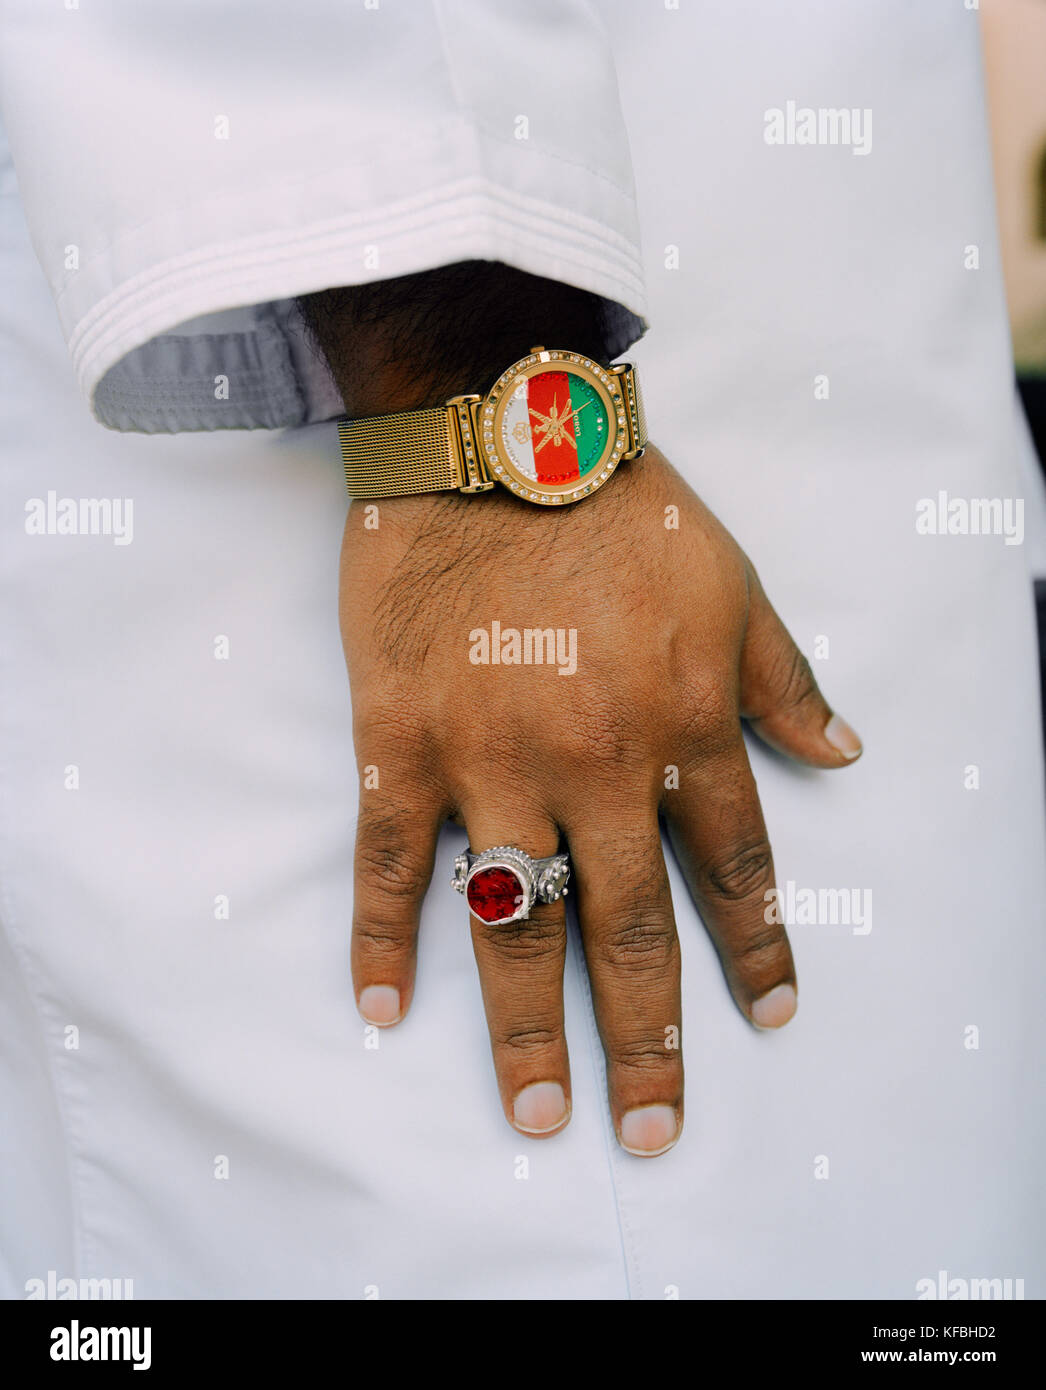 OMAN, Muscat, man wearing wristwatch and finger ring, Omani flag designed  on watch dial Stock Photo - Alamy